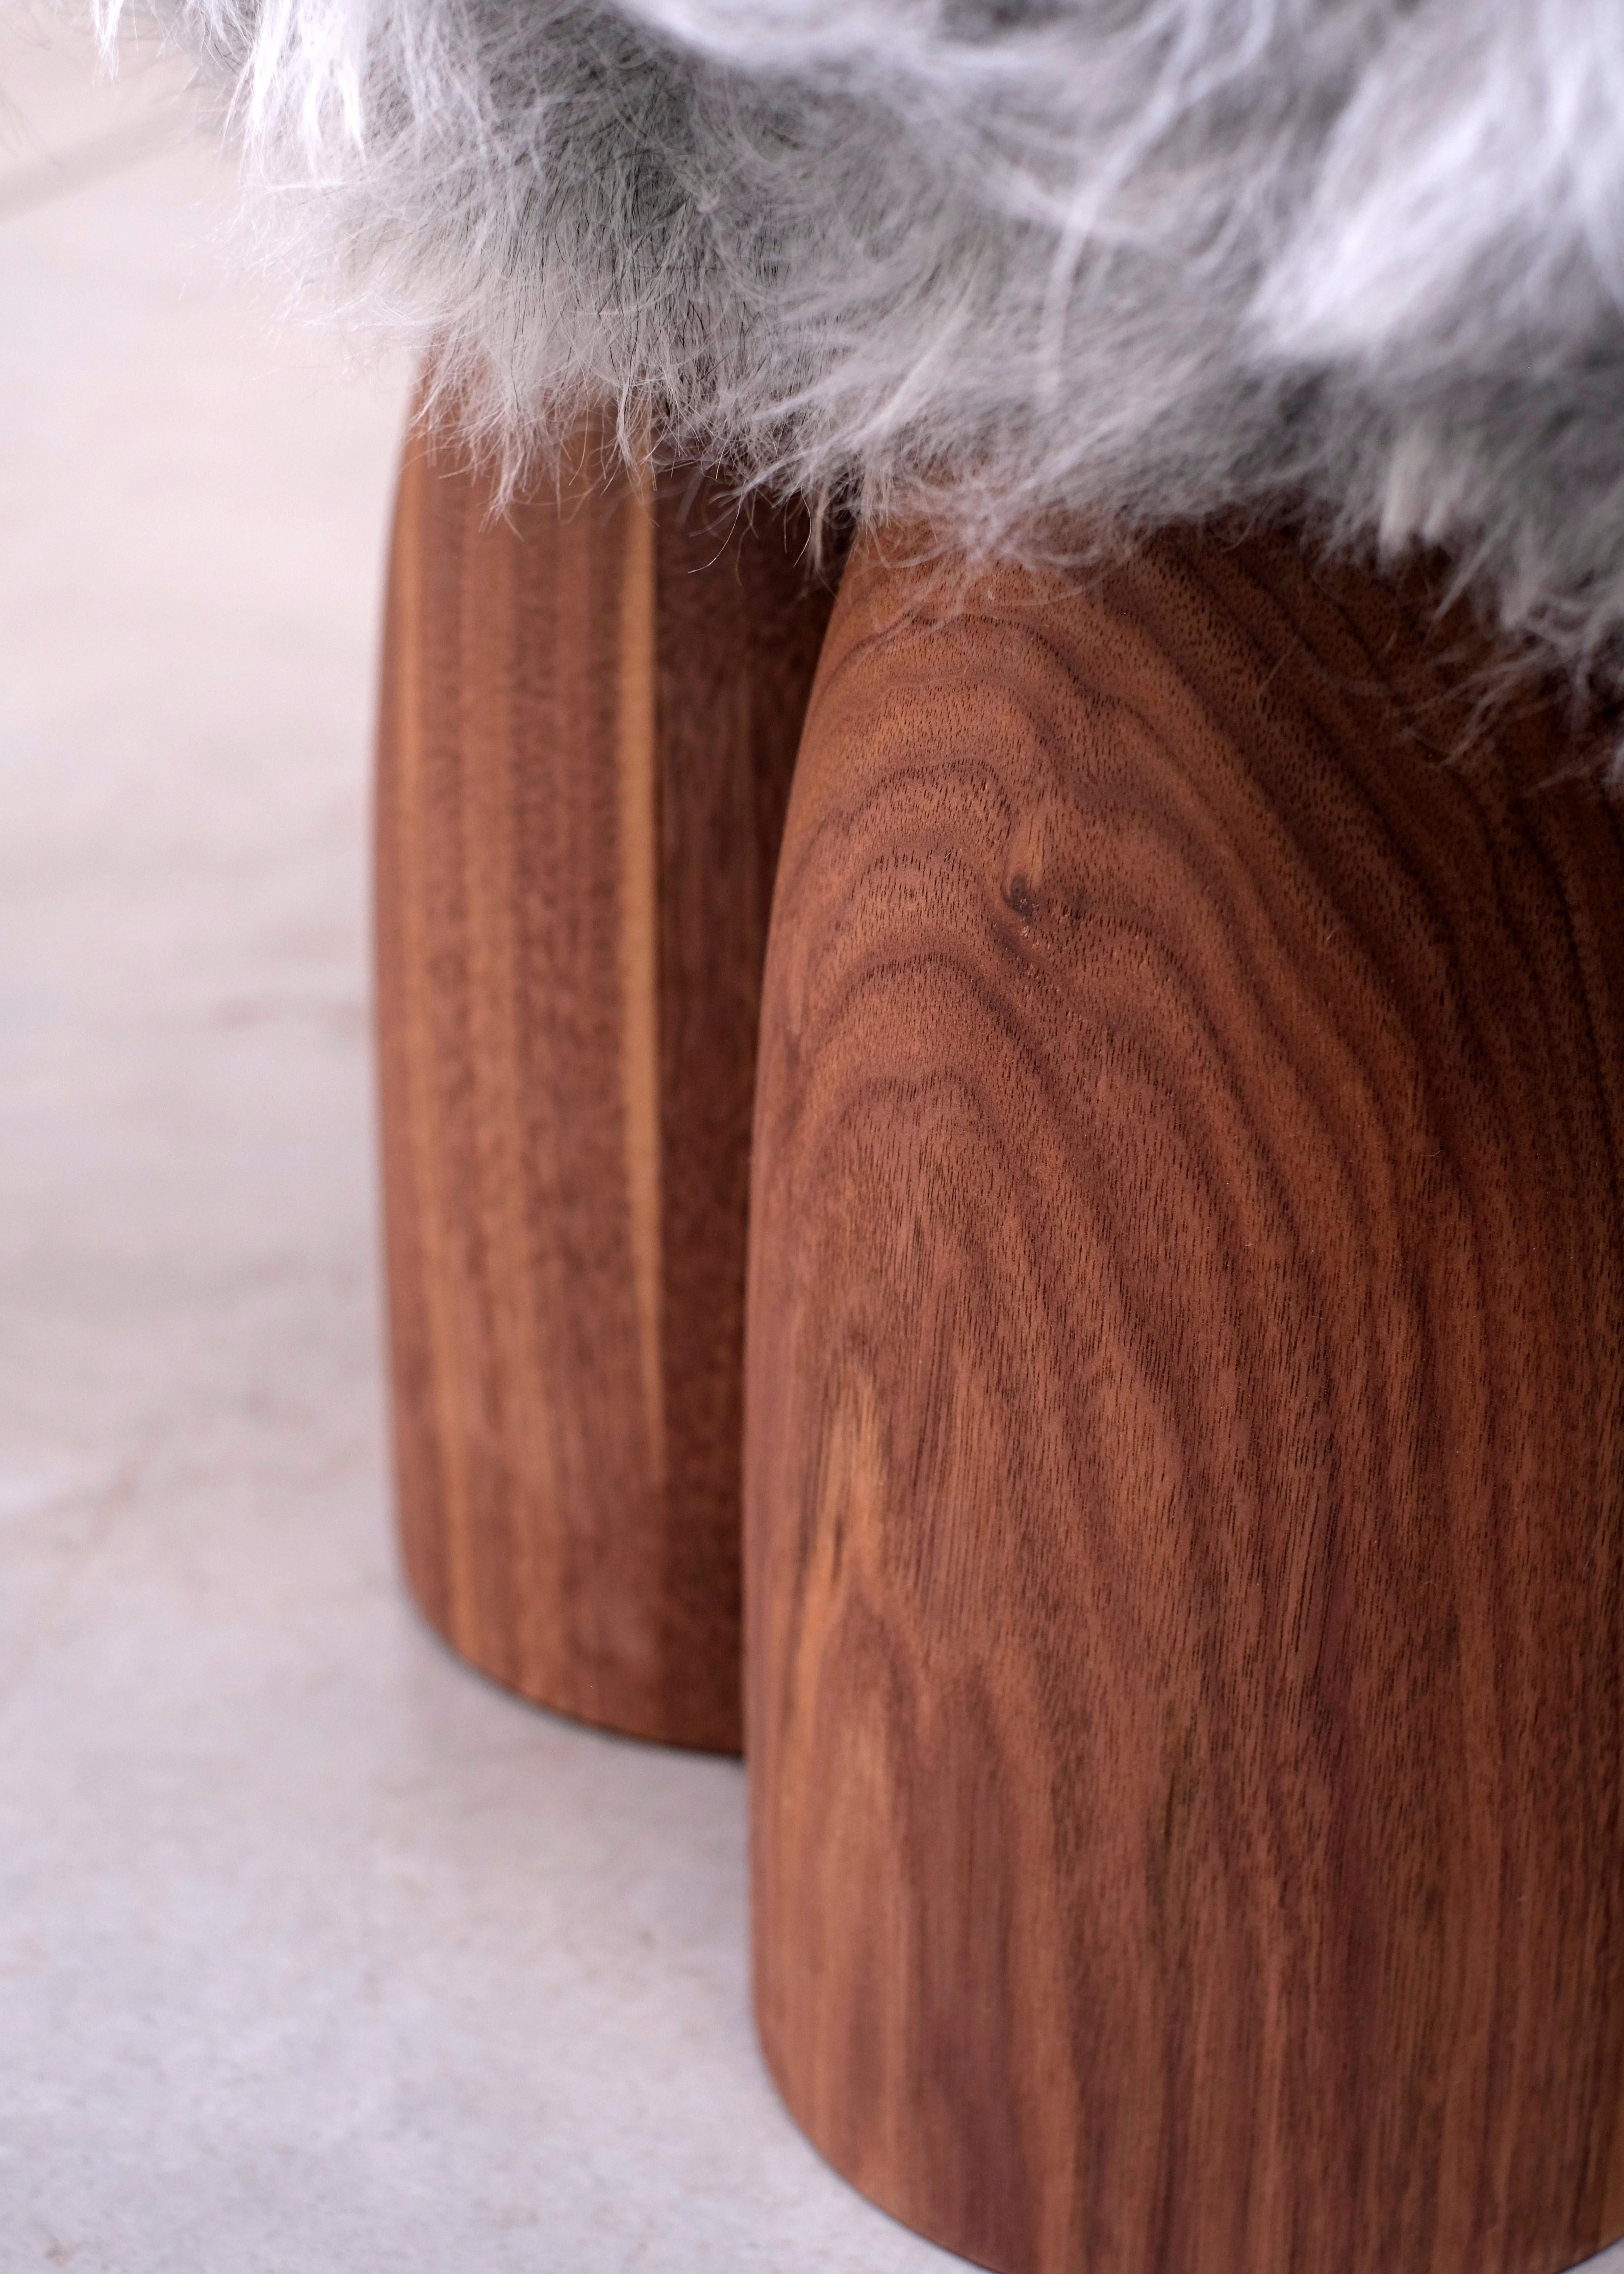 Senufo ottoman in American walnut by Arno Declercq
Made American walnut and sheep wool. (ask for different wool colors)
*Fur color based on availability
Measures: L 45 cm x W 45 cm x H 40 cm, L 17.7” x W 17.7” x H 15.7”

Material: American